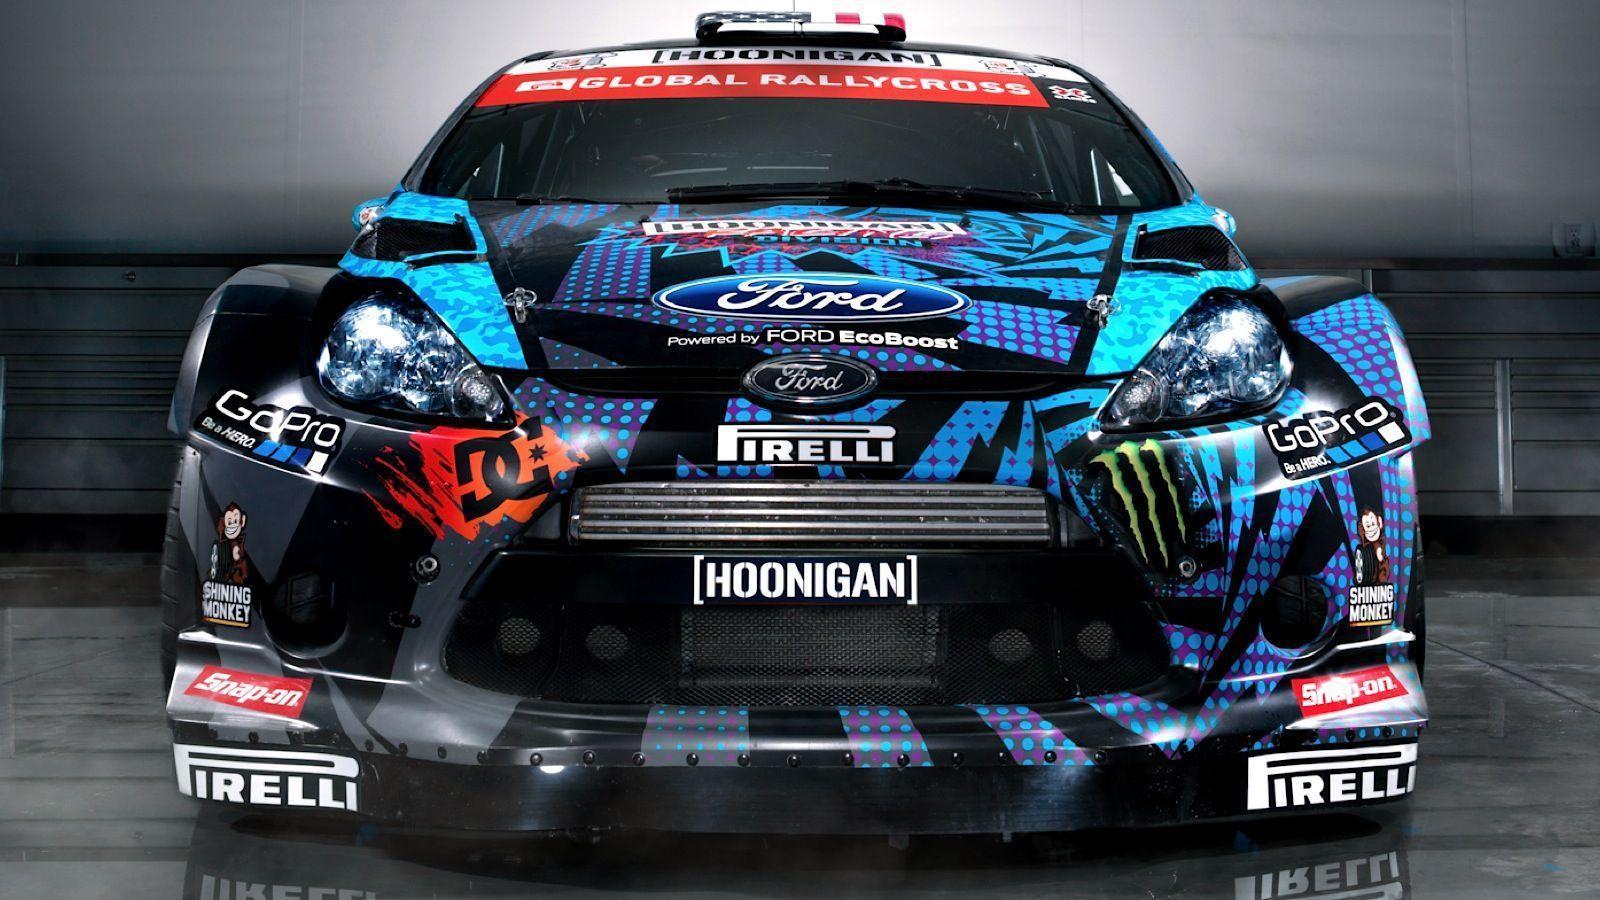 Ford Fiesta 2013 Image HdCars Wallpaper. Ford